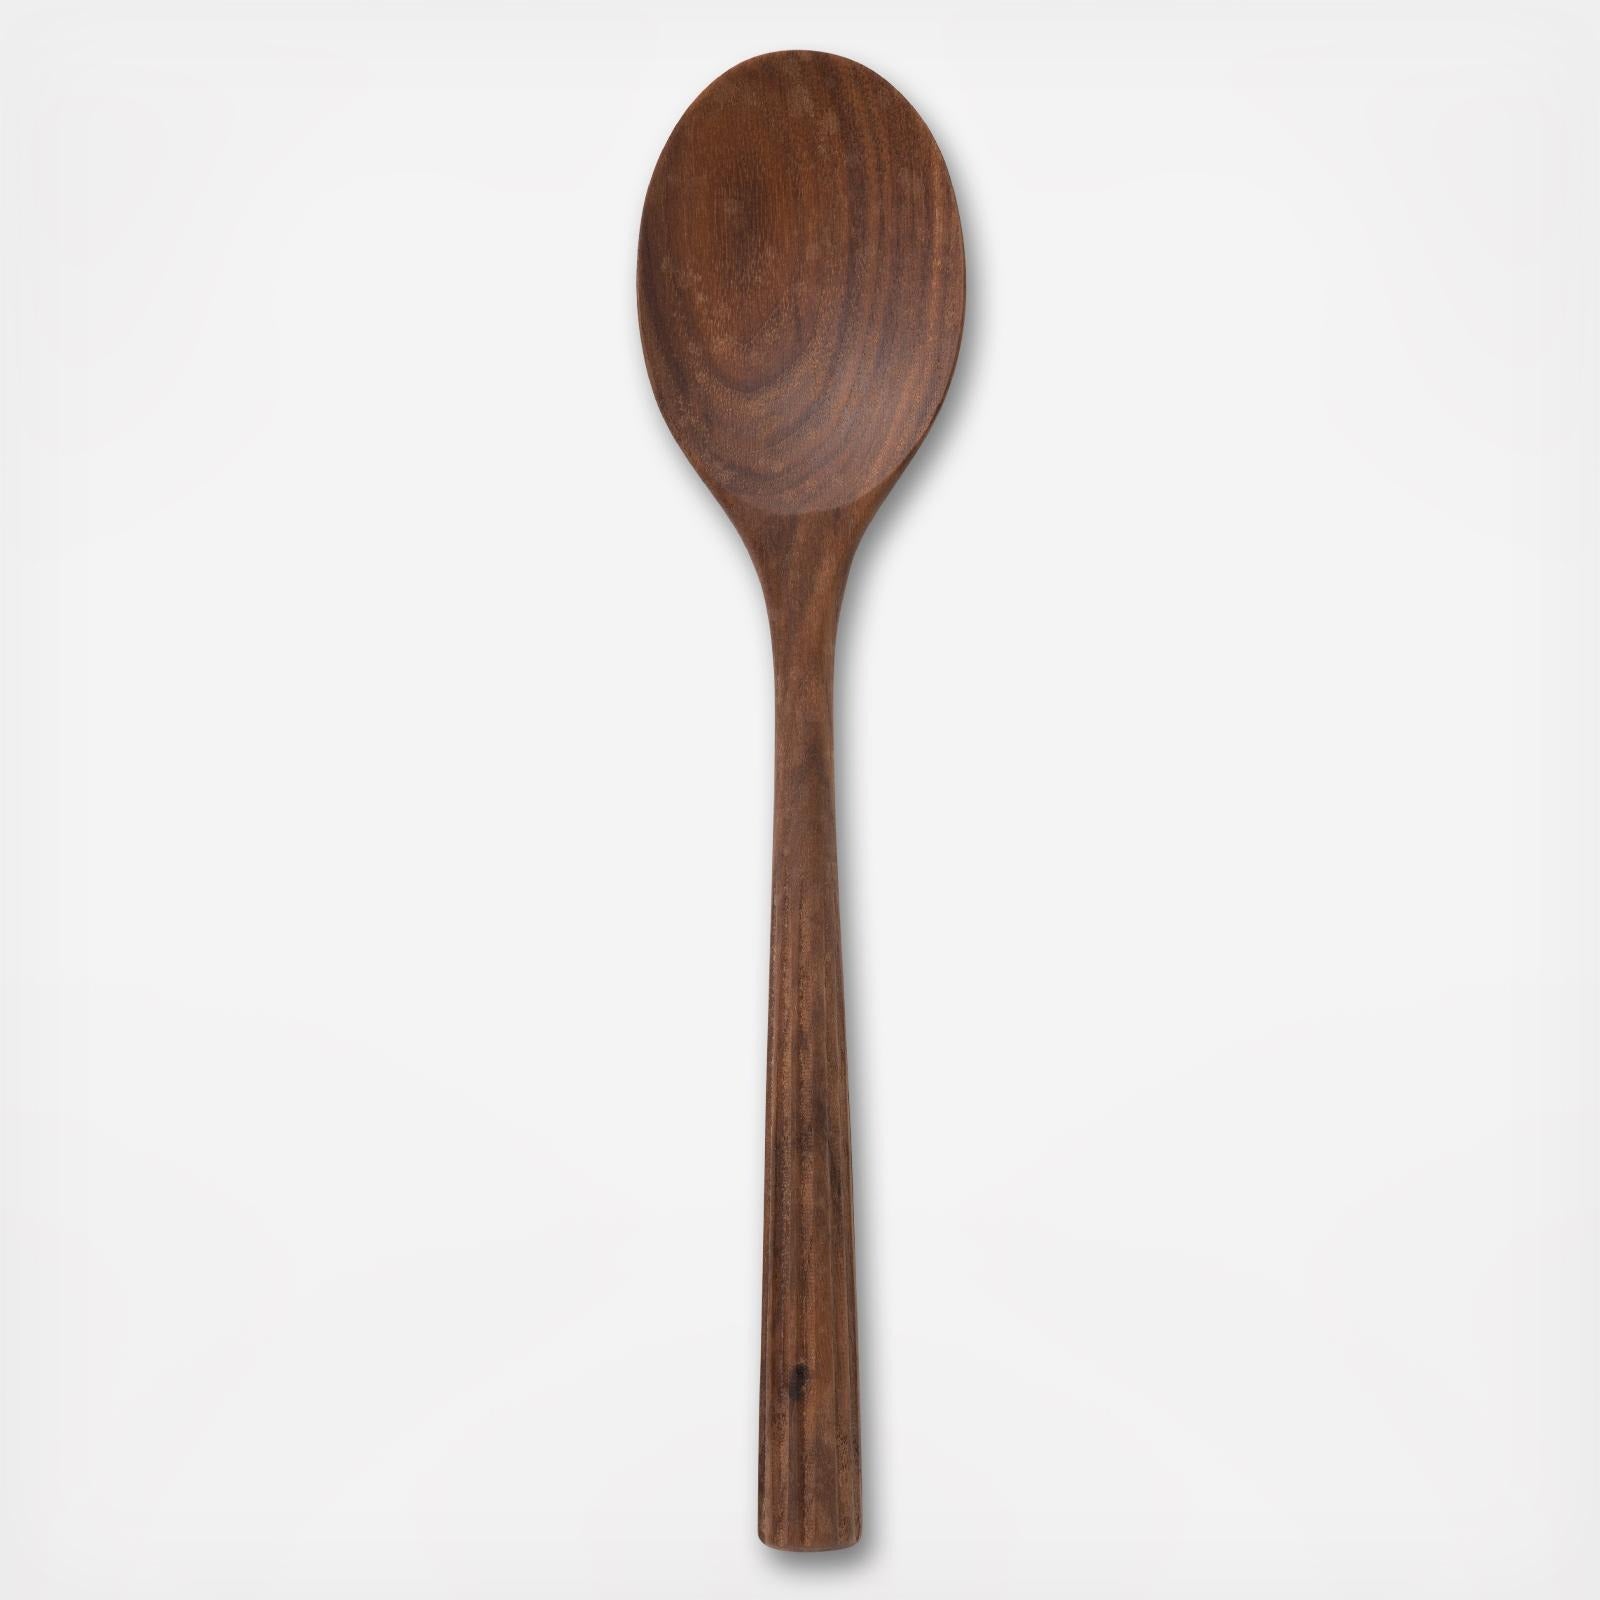 Walnut Spoon Collection